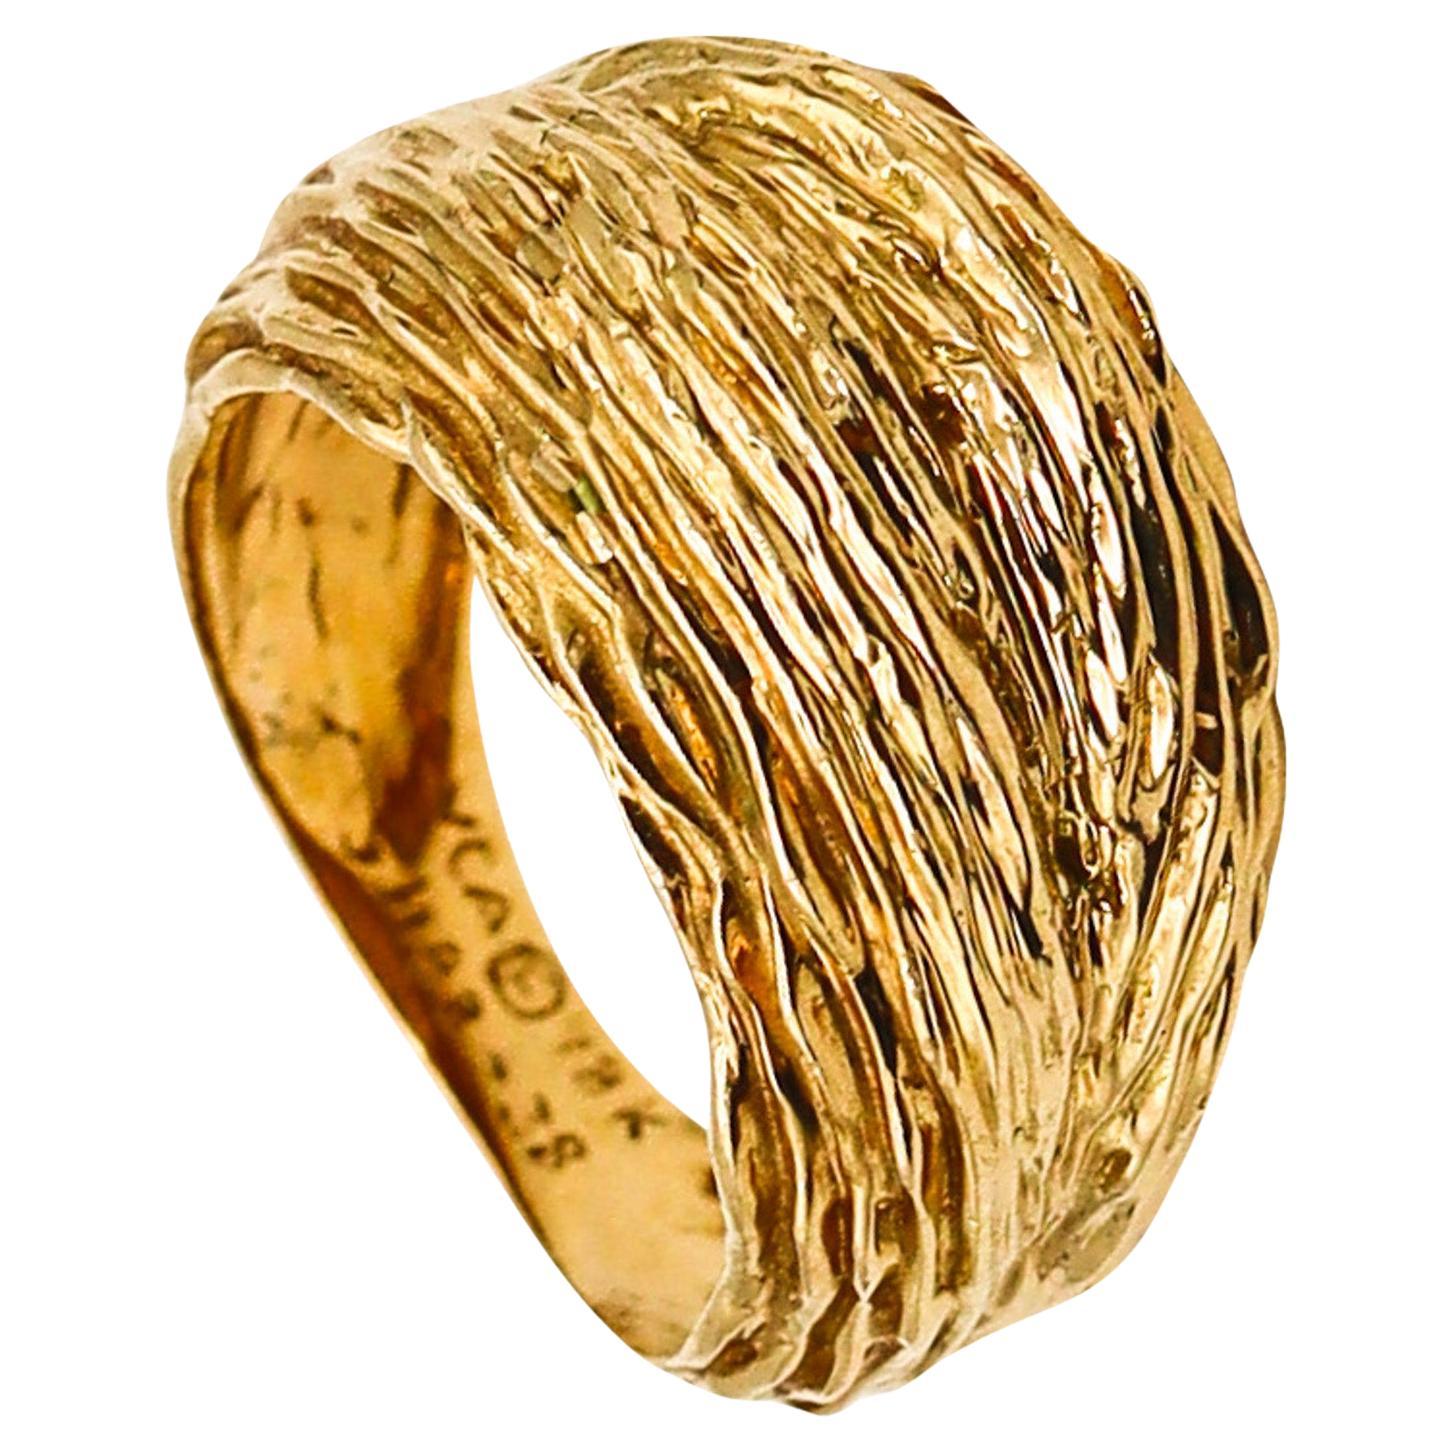 Van Cleef & Arpels 1970 Textured Cocktail Ring in Solid 18Kt Yellow Gold